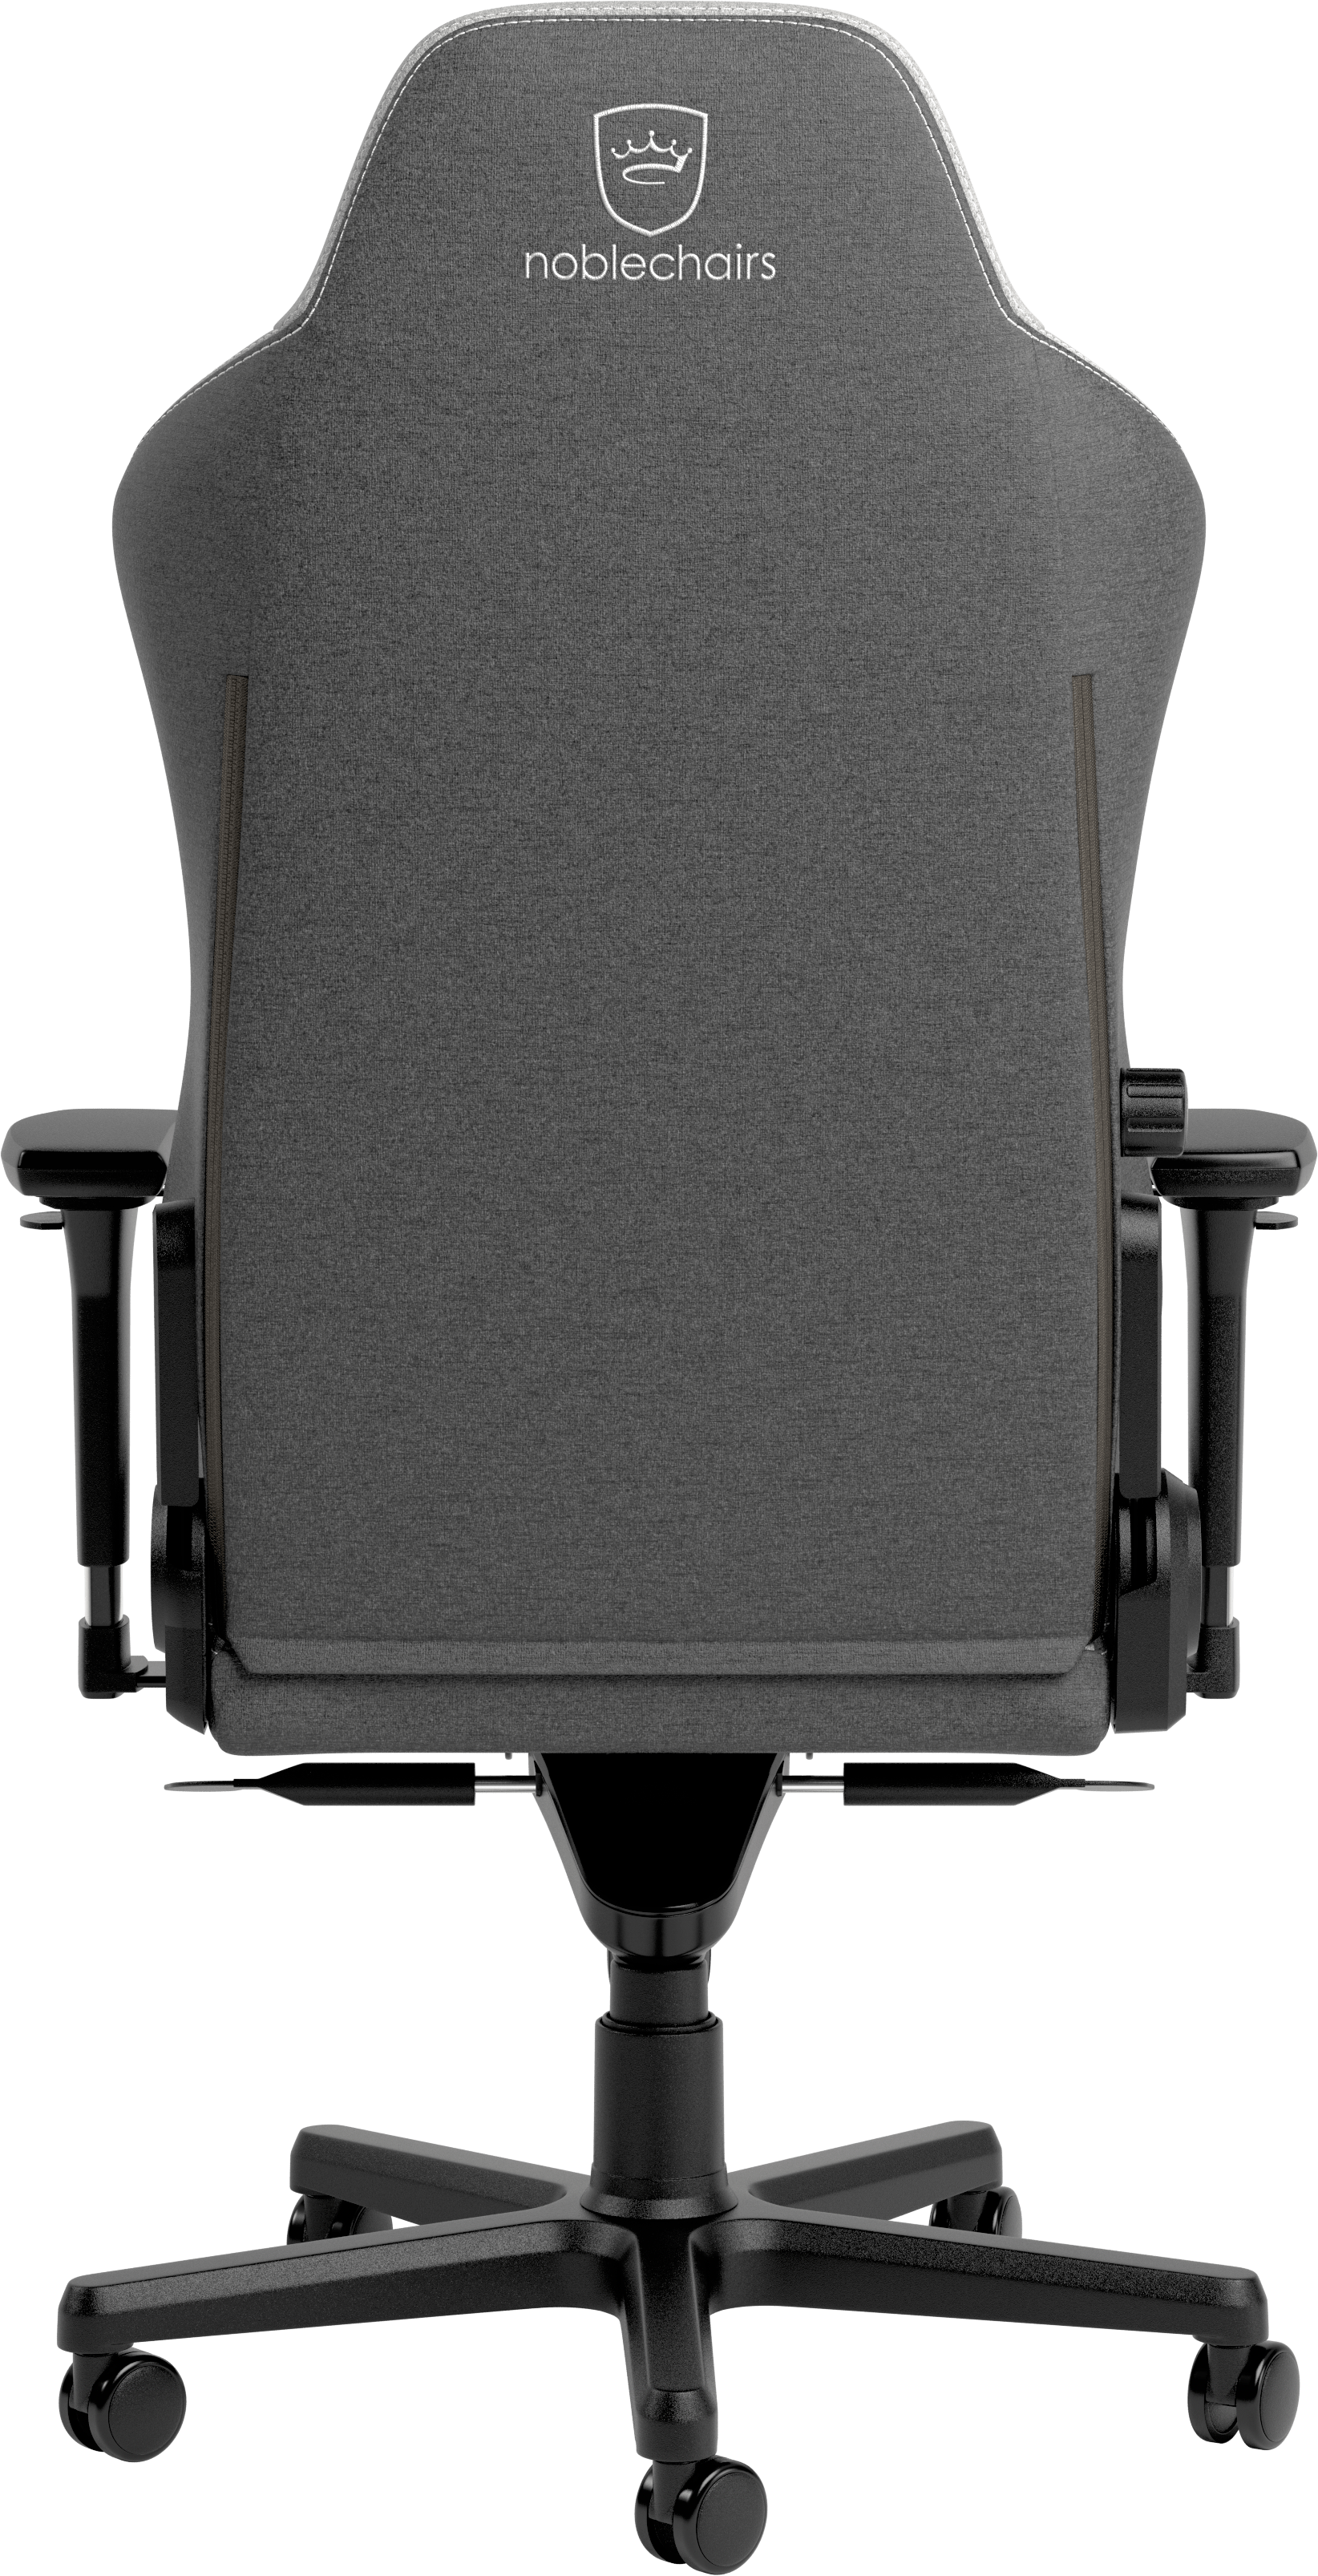 noblechairs HERO TX Two Tone Gray Limited Edition stoffen bekleding